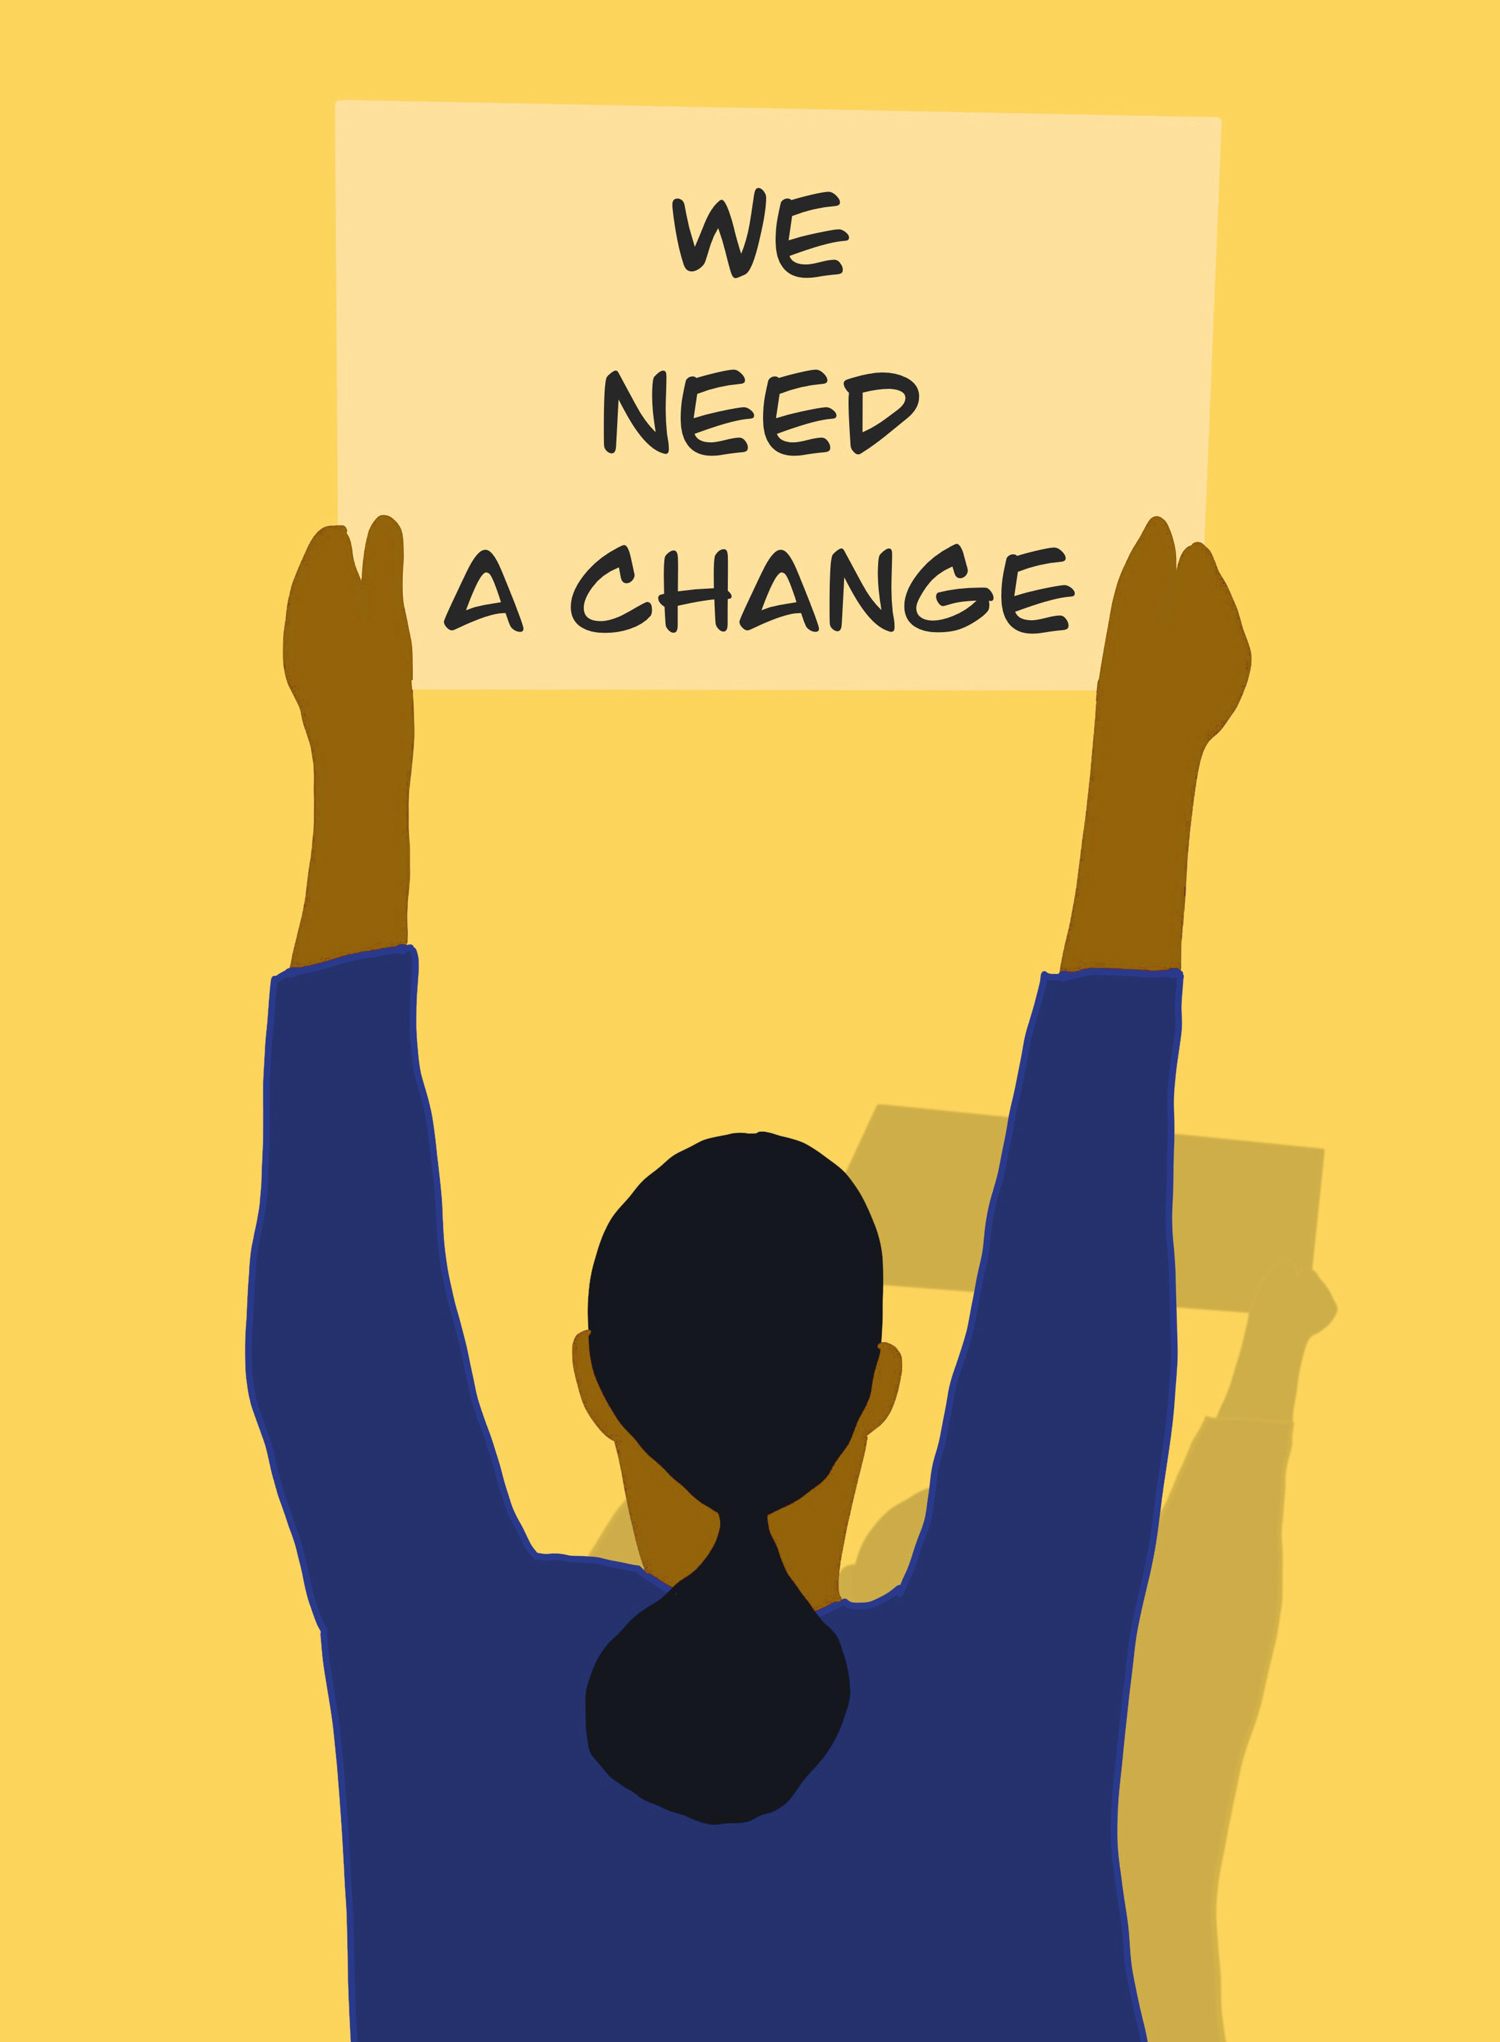 Illustration of a person holding a sign that reads: "We Need A Change" against a yellow background